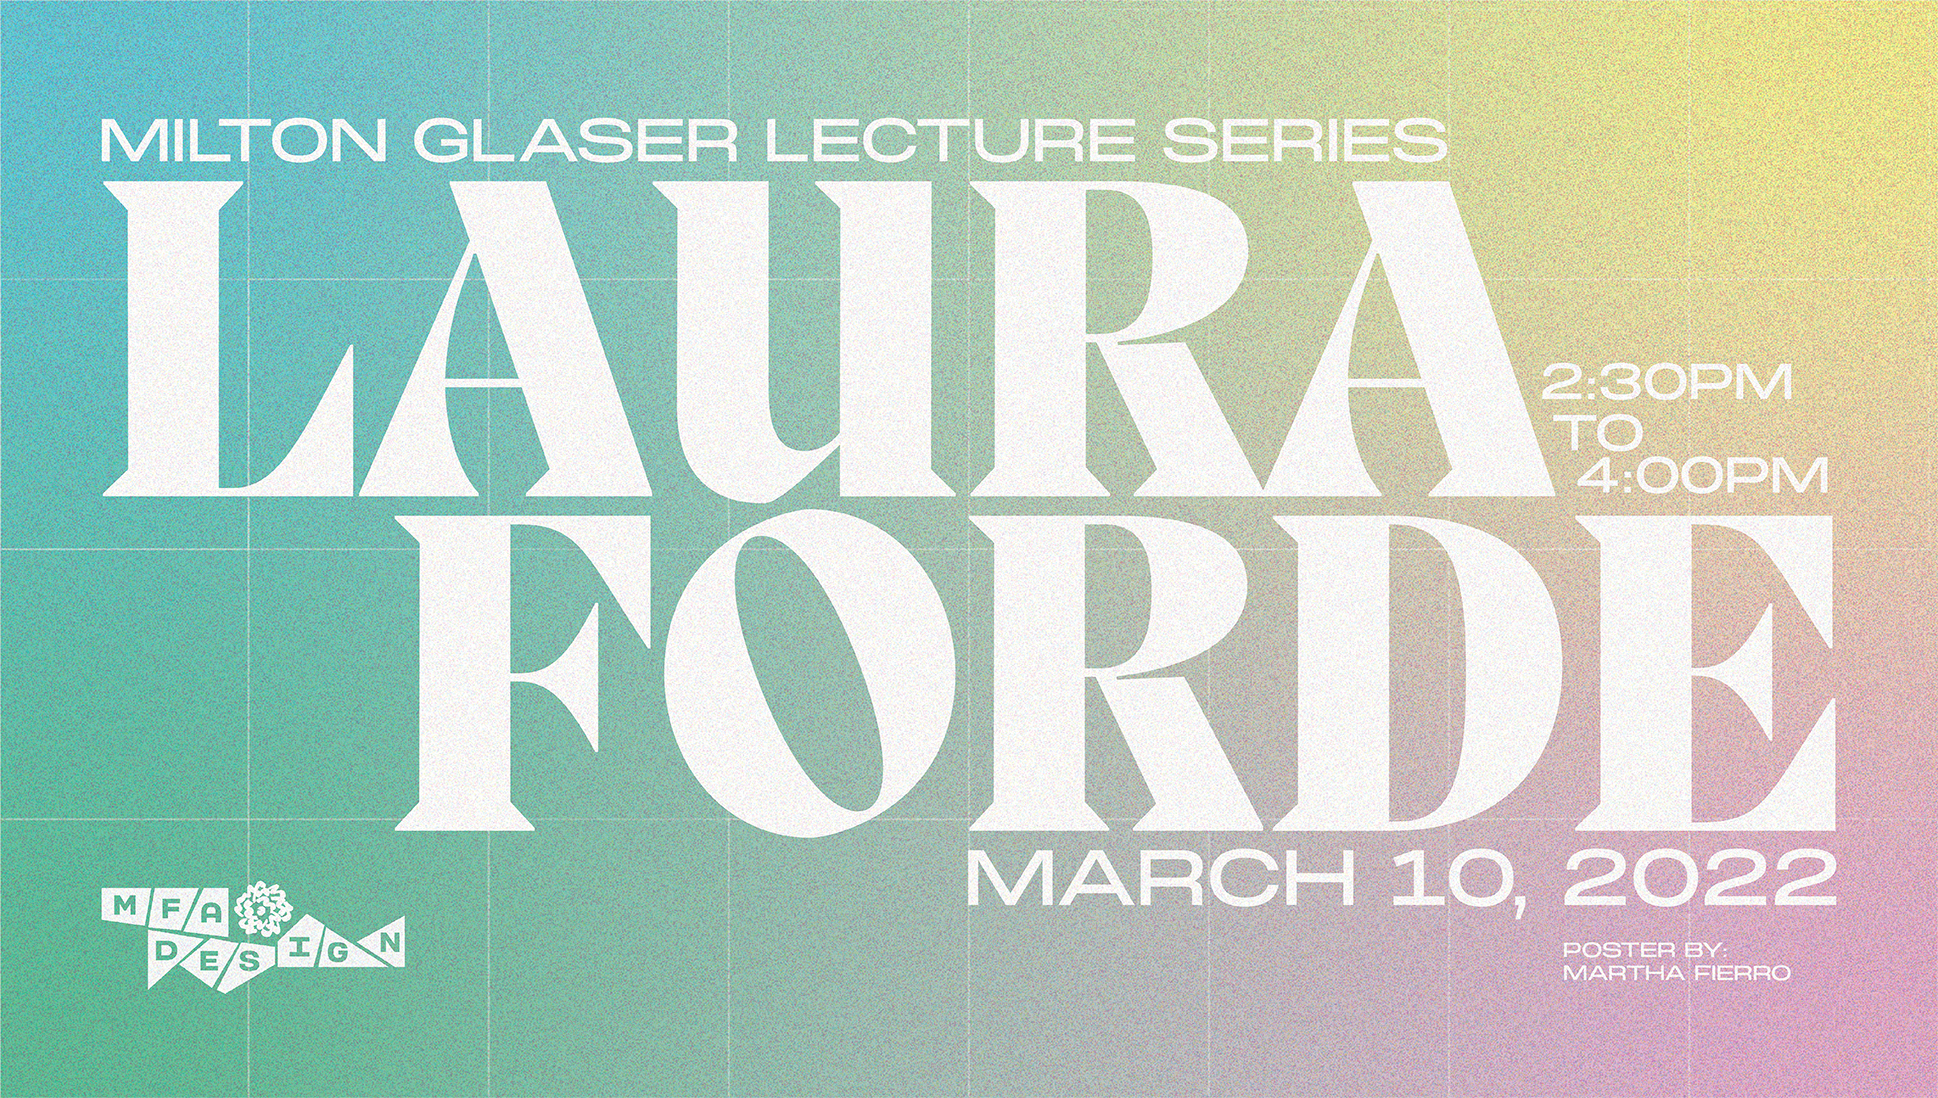 Milton Glaser lecture series Laura Forde event poster on multi-color background with blue, green, yellow, pink, etc.